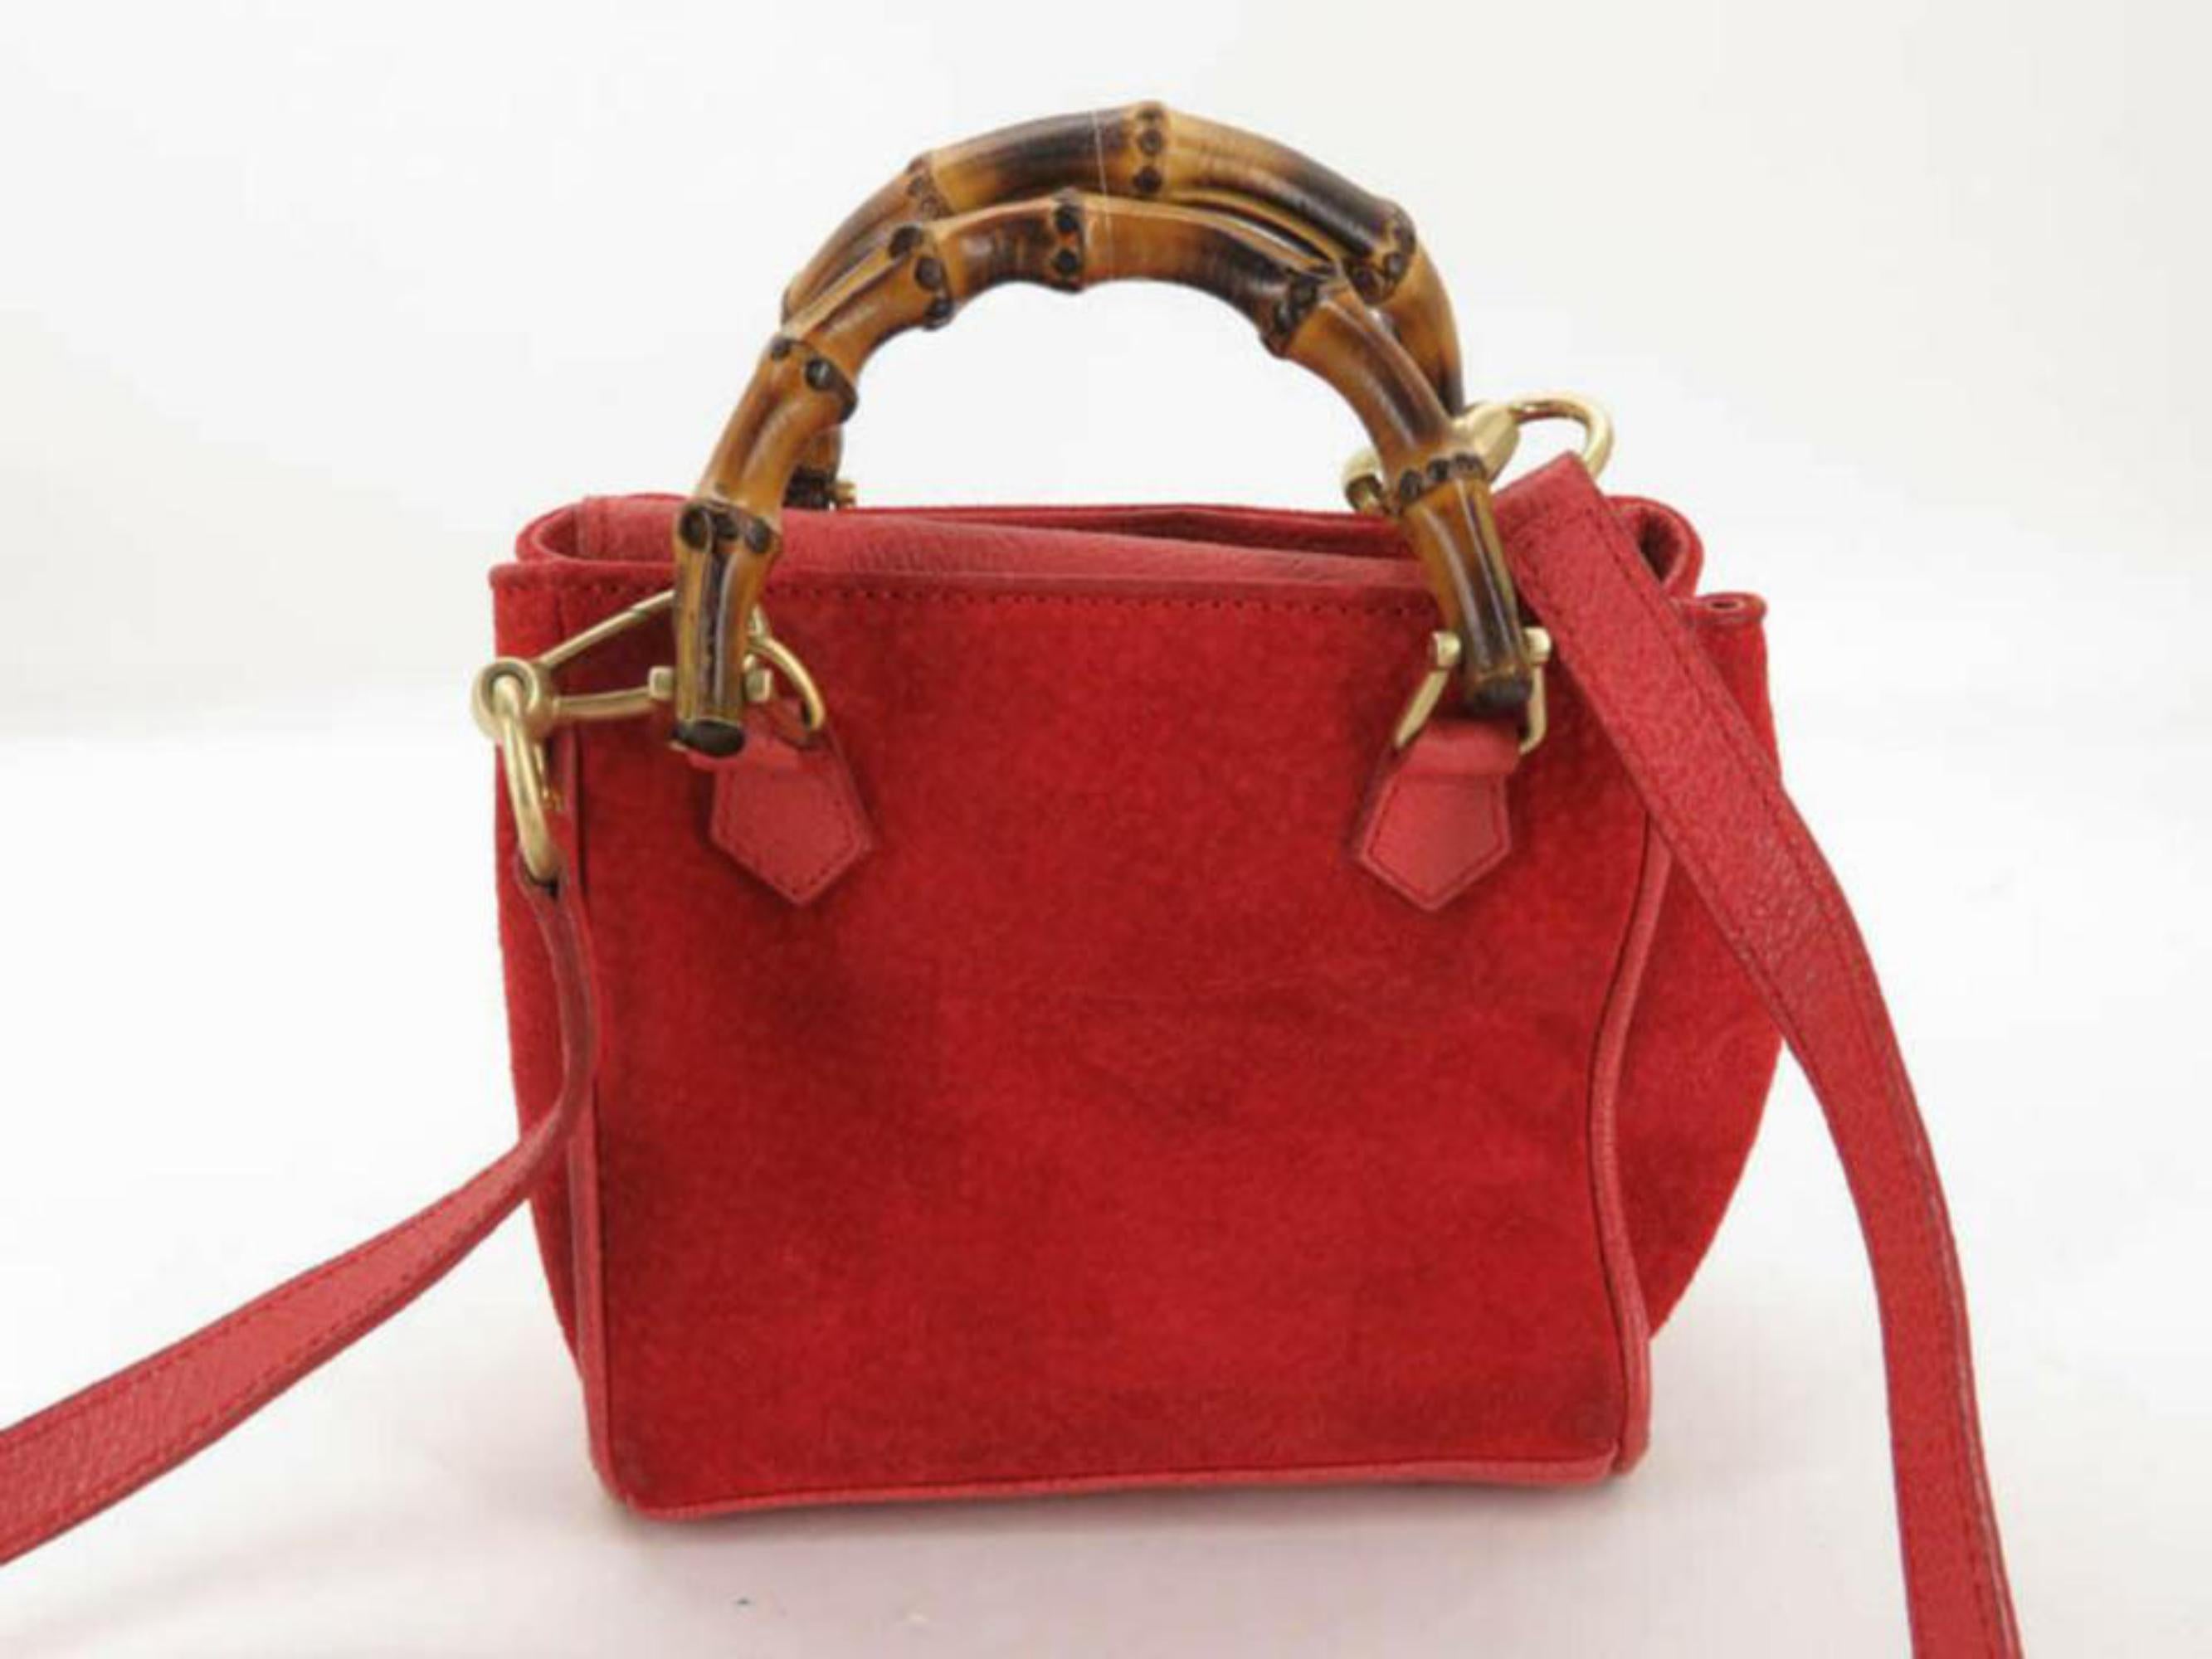 Gucci 2way Bamboo Shopper Tote 870304 Red Suede Leather Satchel For Sale 4